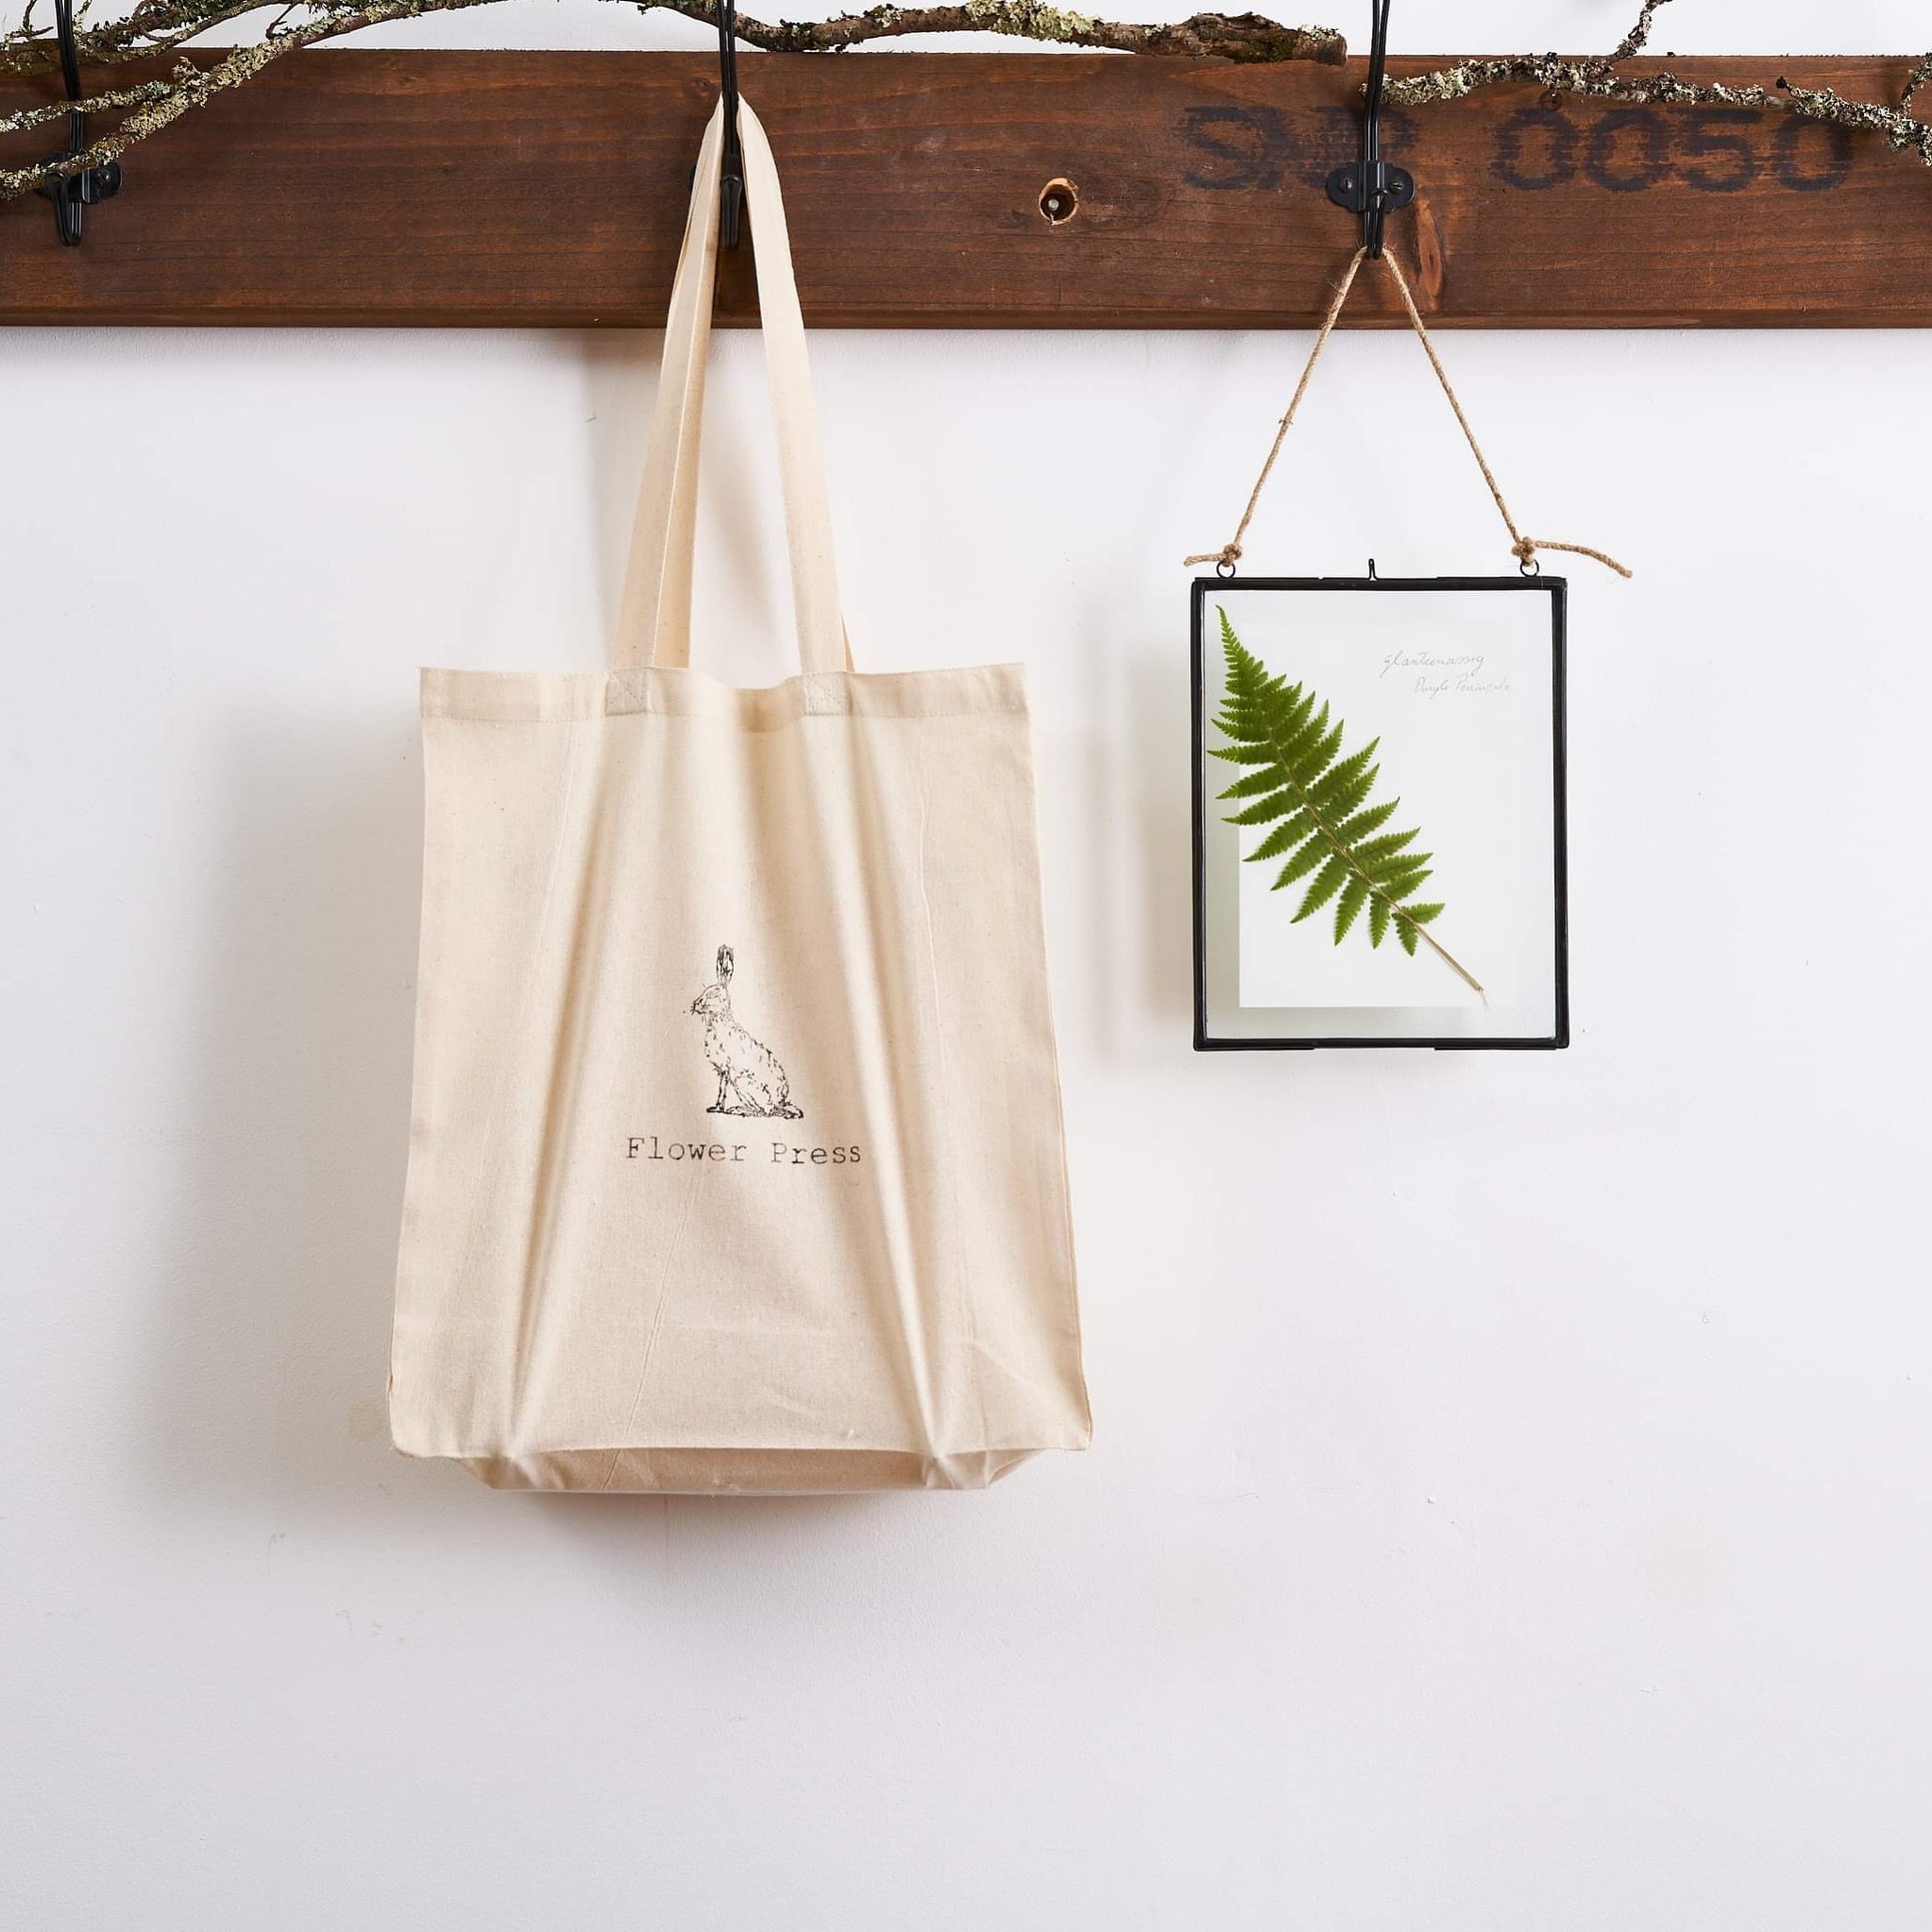 Each Flower Press includes a lovely cotton canvas carrying bag with extra long handles to allow you to carry your flower press over your shoulder when foraging, and a small matching drawstring bag for carrying your snips without scratching your beaut